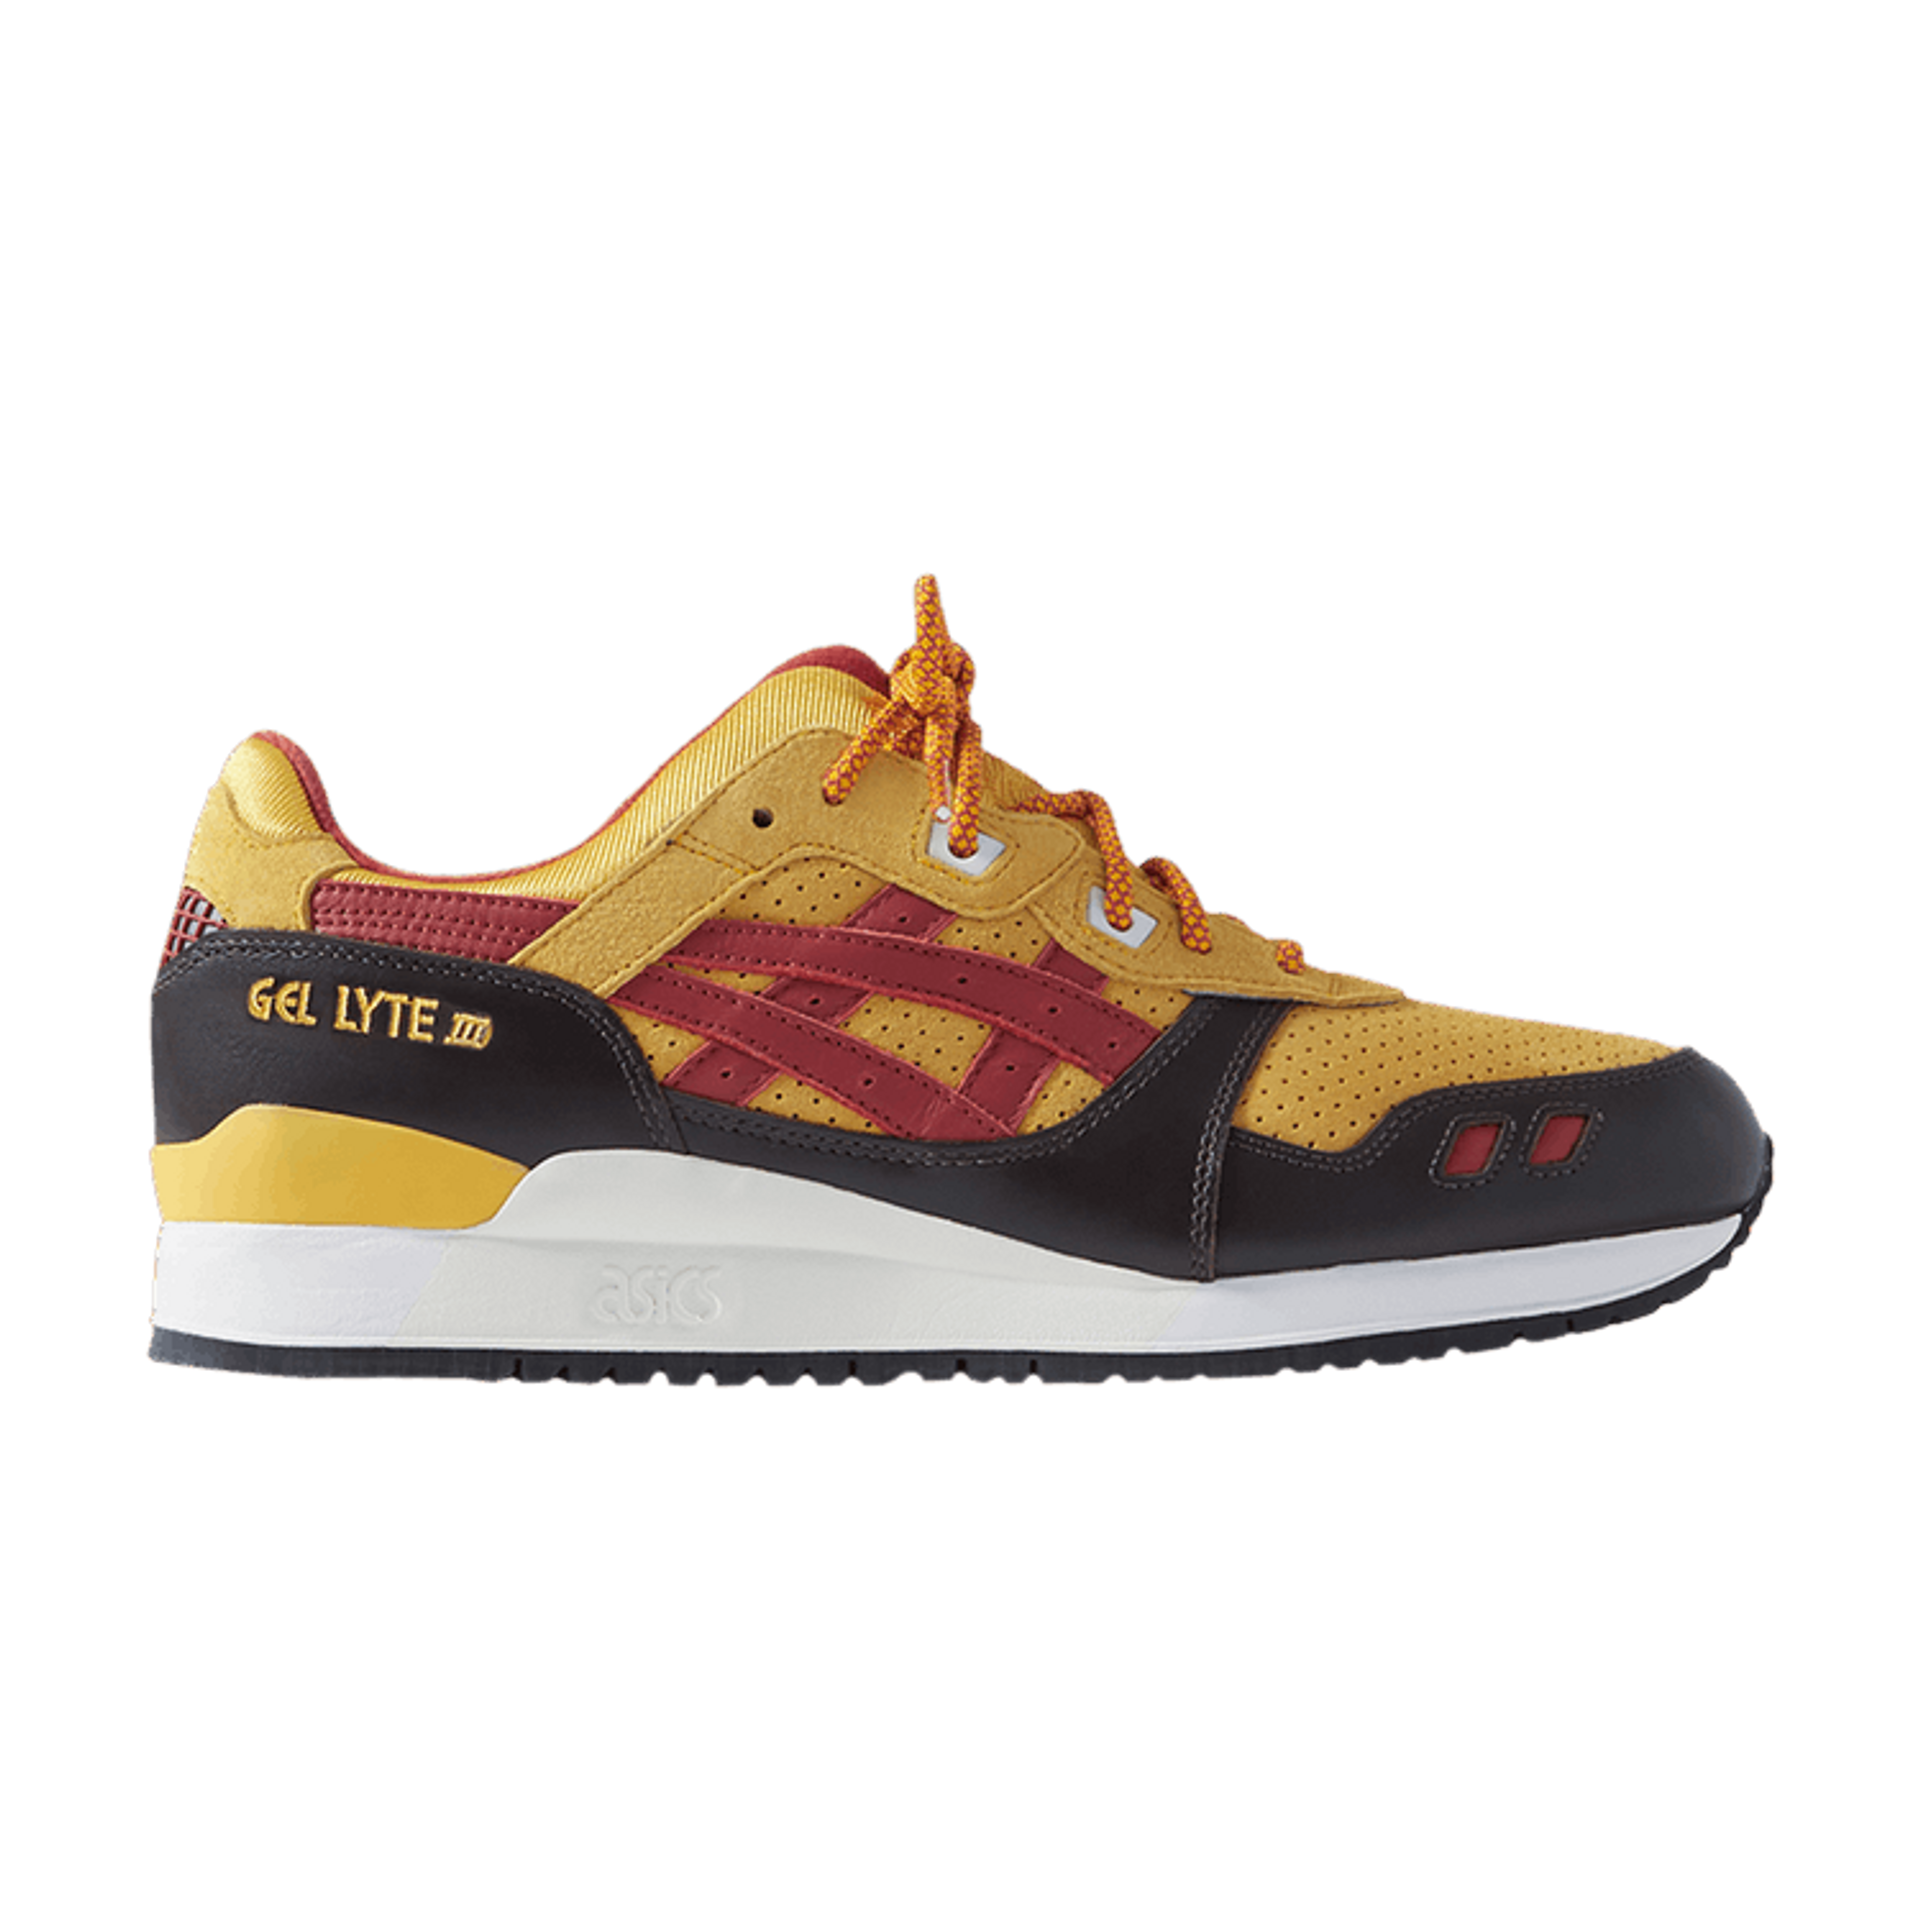 X-Men x Kith x ASICS Gel Lyte 3 '60th Anniversary - Wolverine 1980' (Trading Card Not Included)